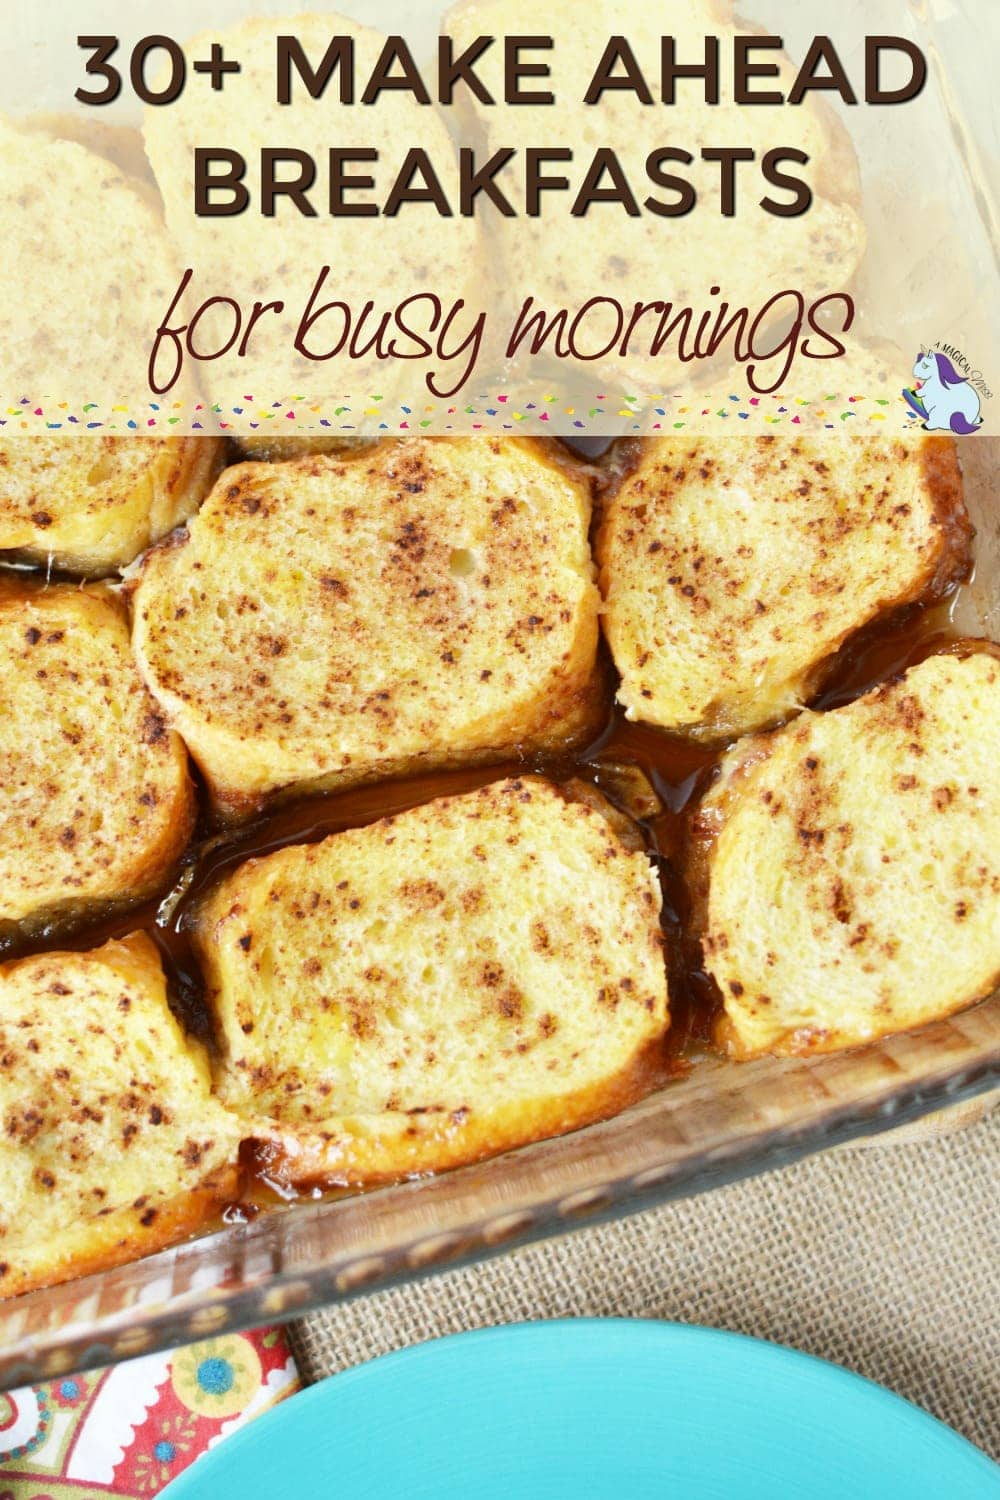 Easy Breakfast Recipes for Hectic Mornings